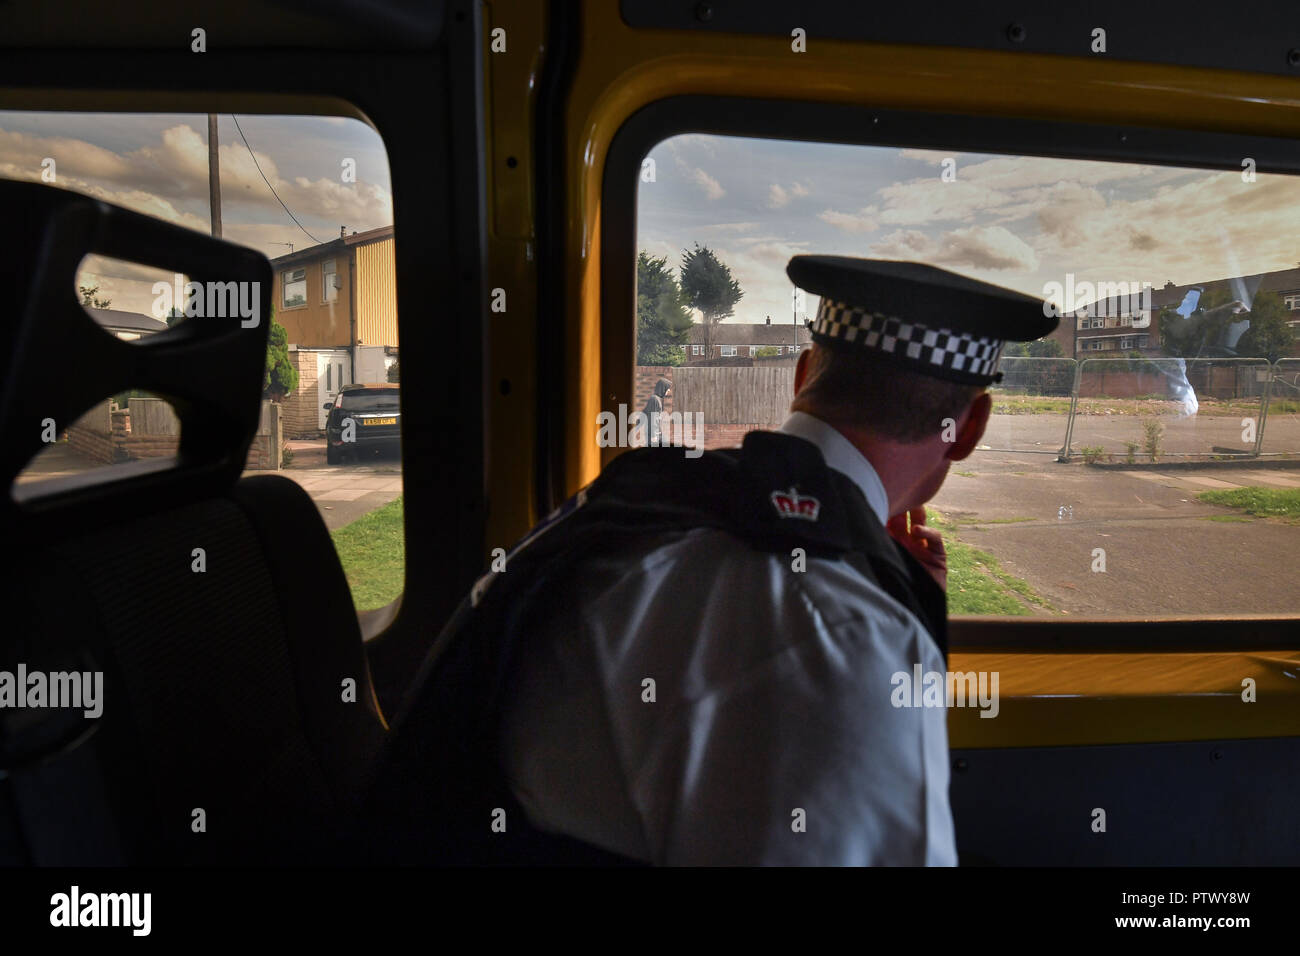 Superintendent Matt Boyle looks out of a patrol van window as Merseyside Police officers carry out a Stop and Search operation in Bootle, Liverpool Stock Photo